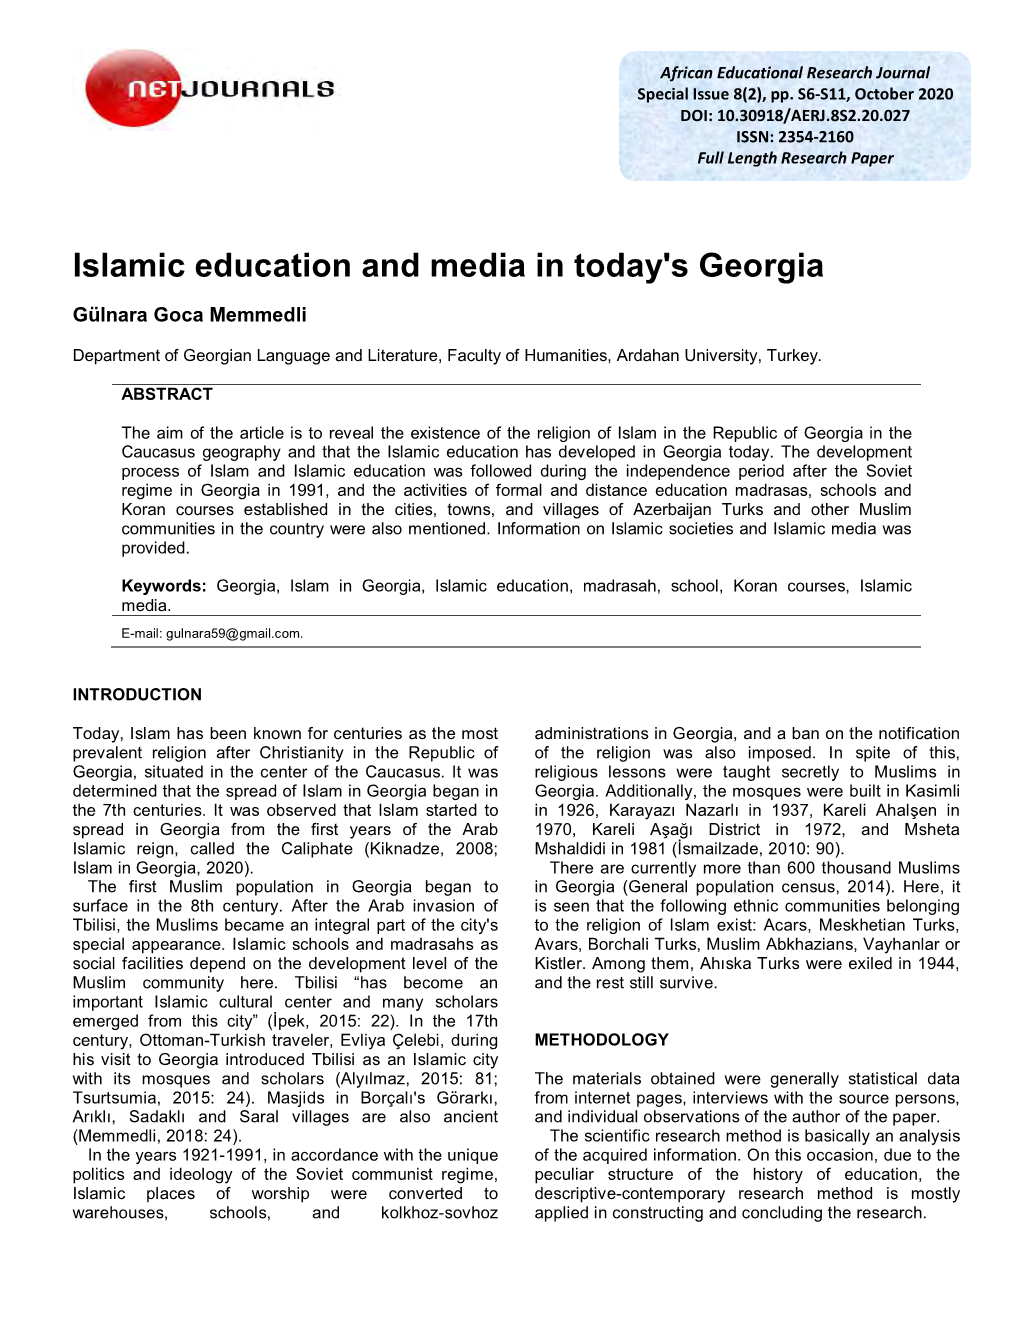 Islamic Education and Media in Today's Georgia